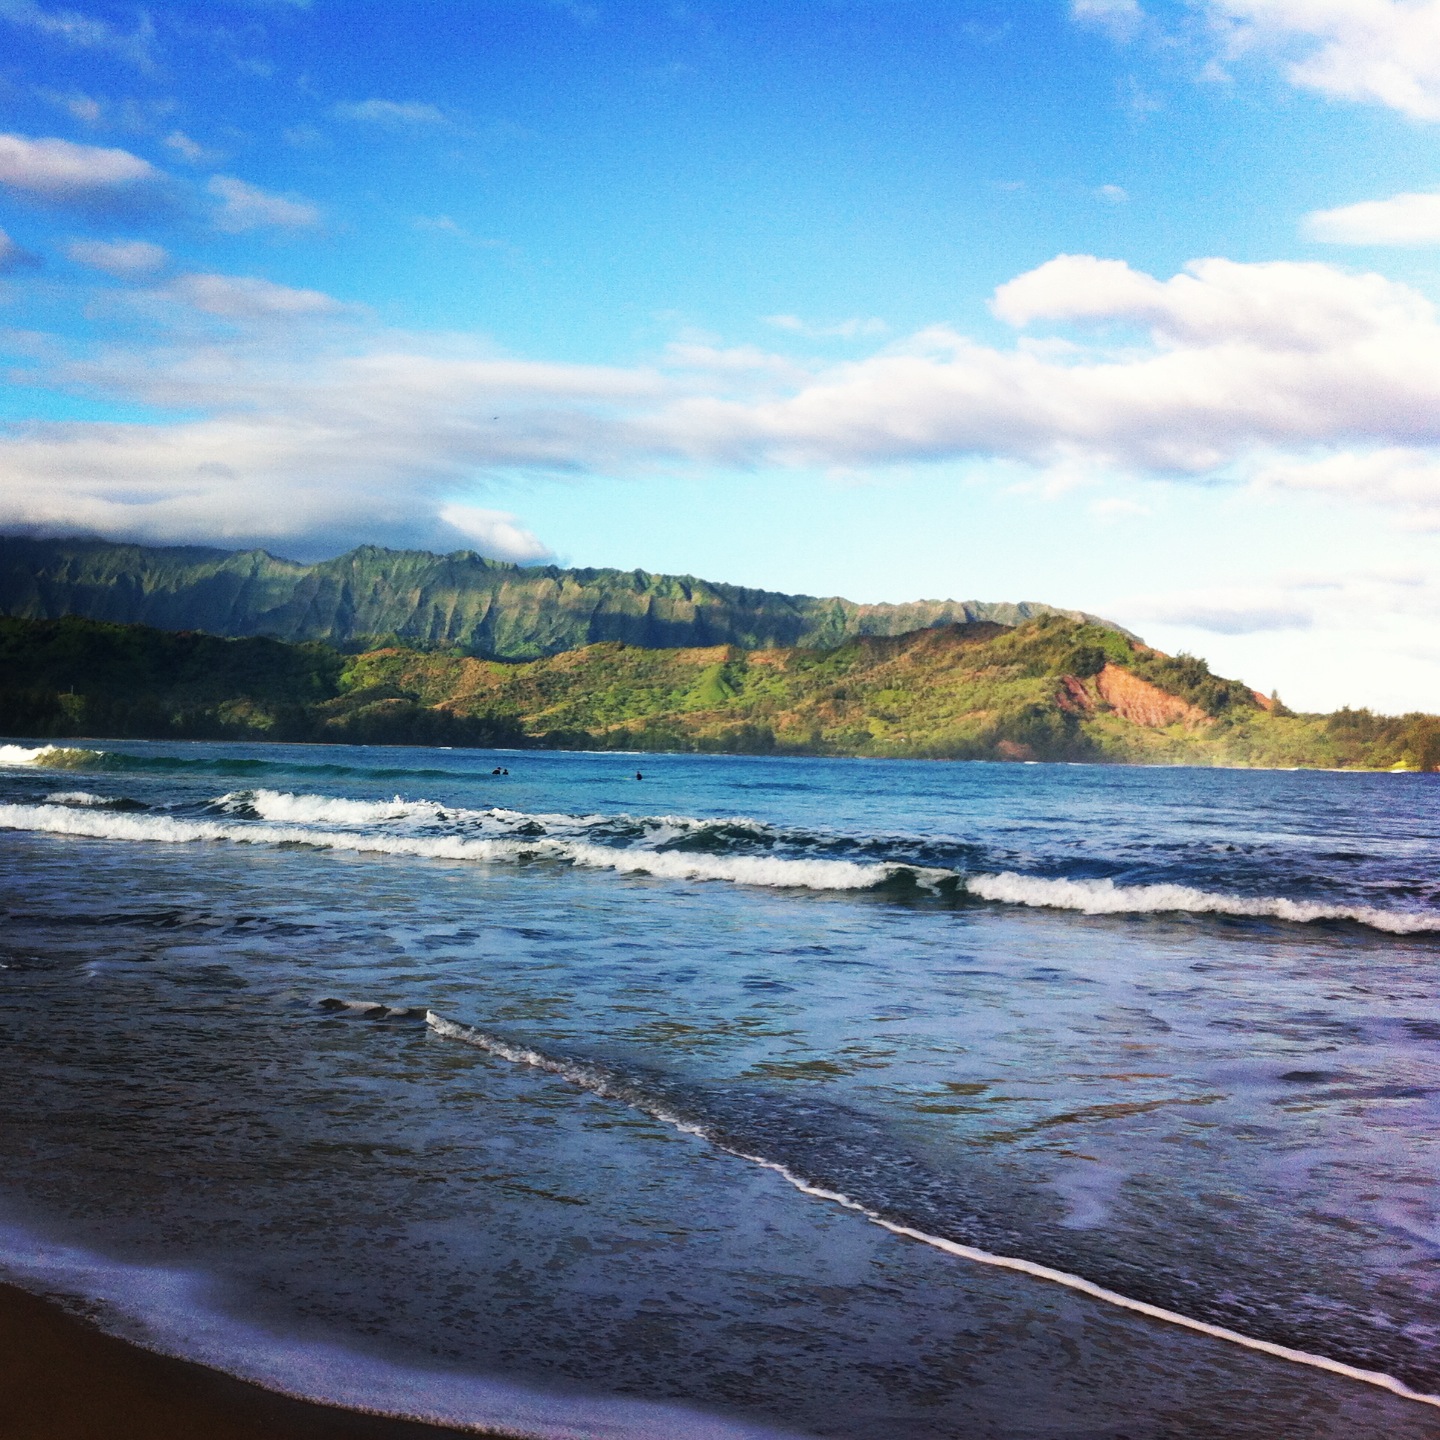 View across Hanalei bay from the beach.